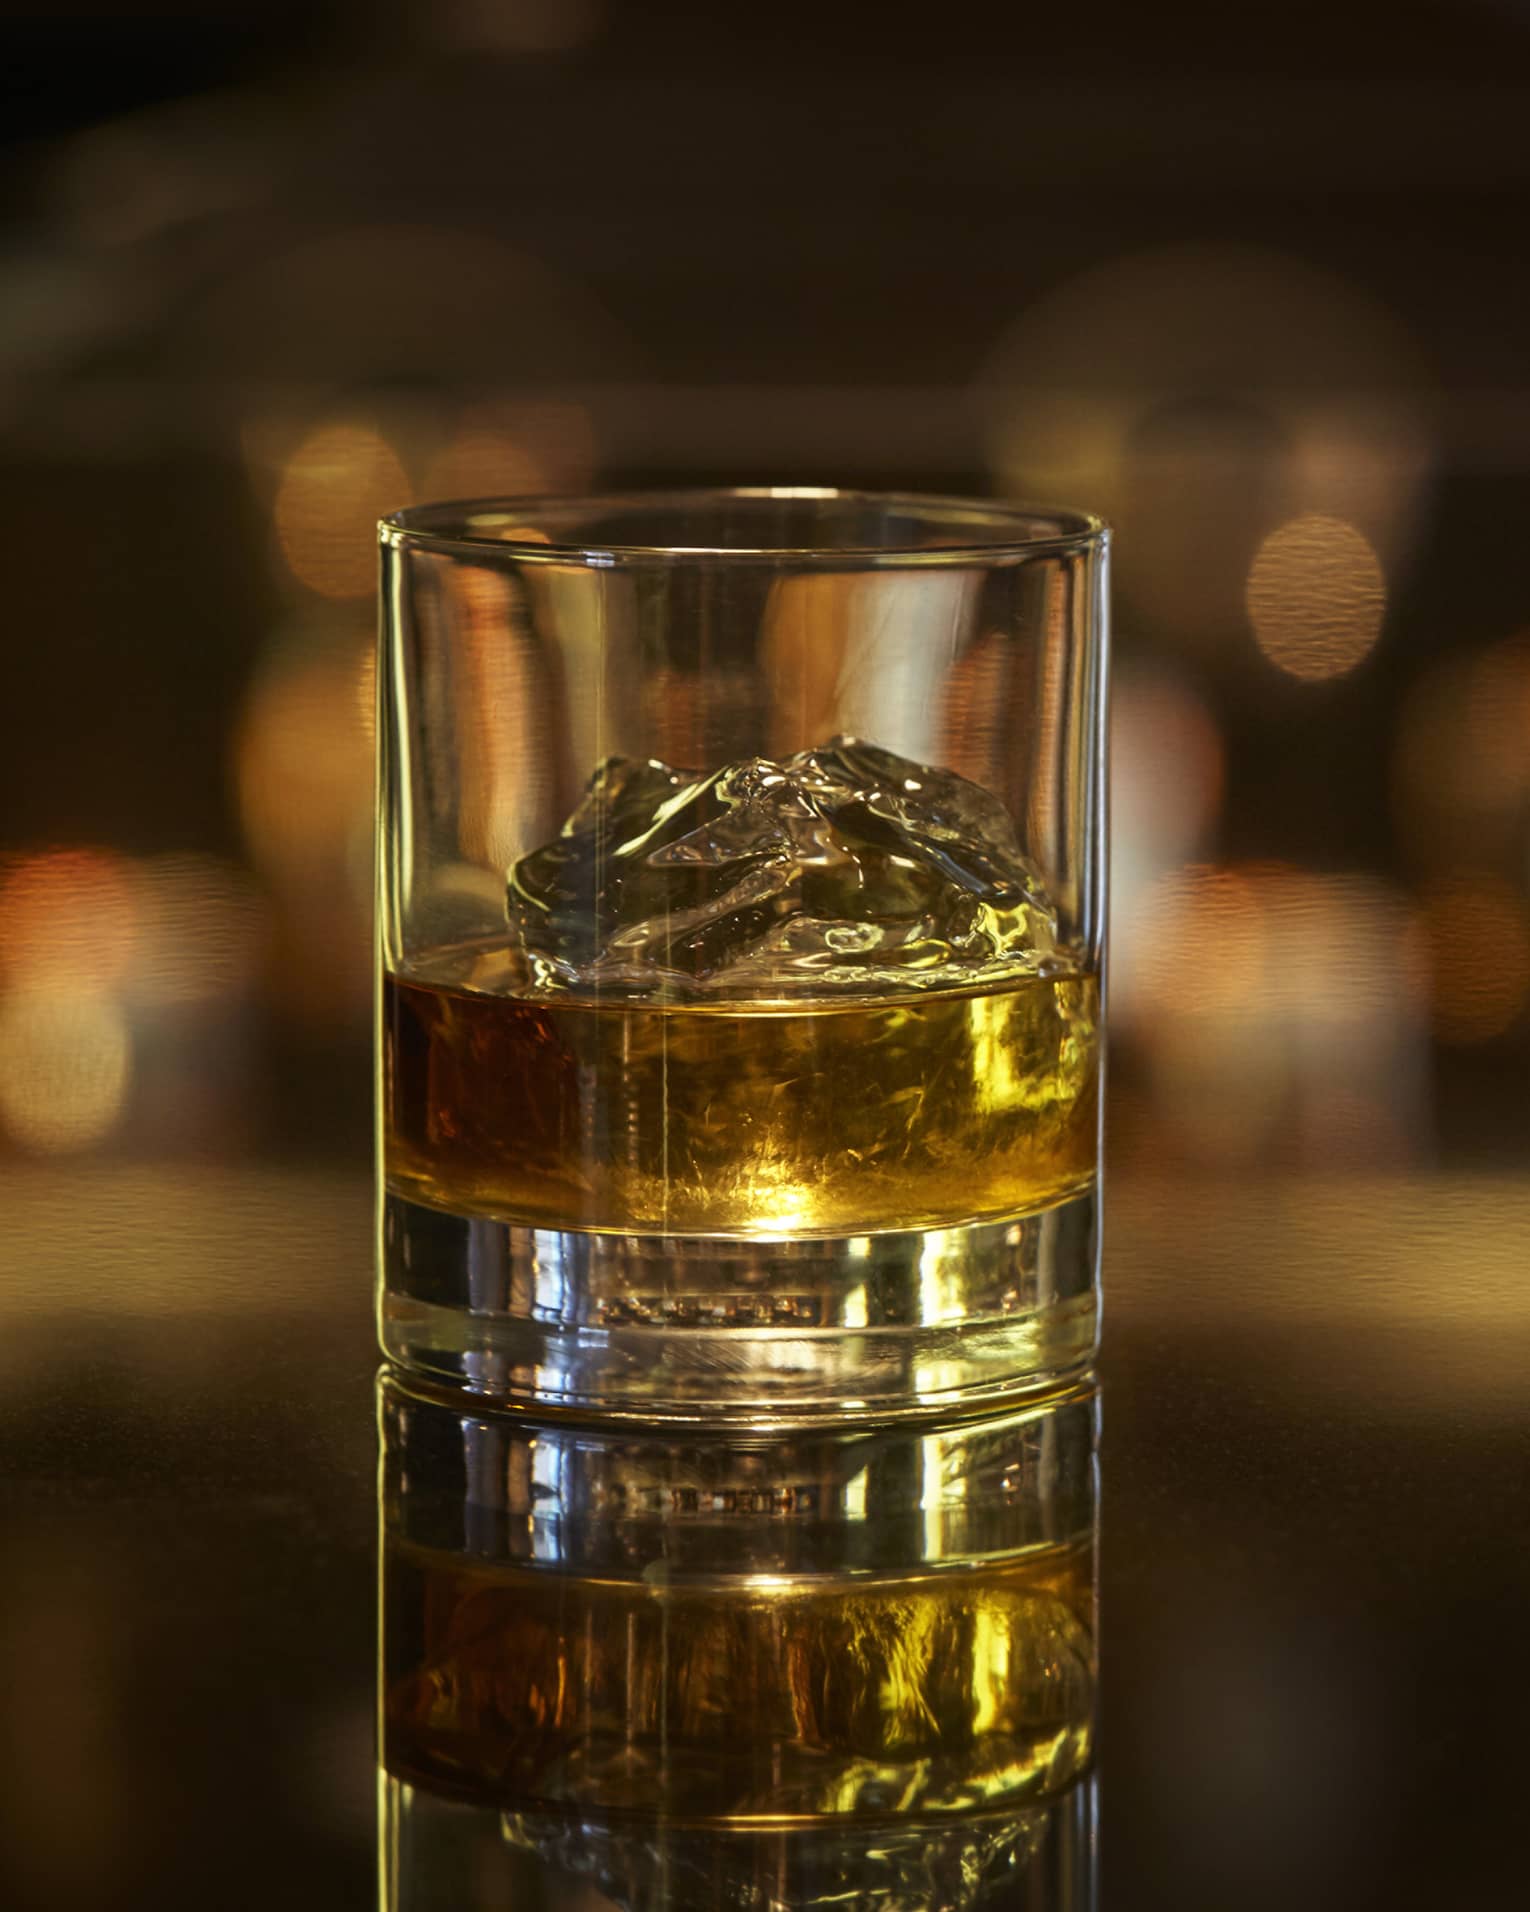 Scotch on the rocks, liquor on ice cubes in rock glass on bar 